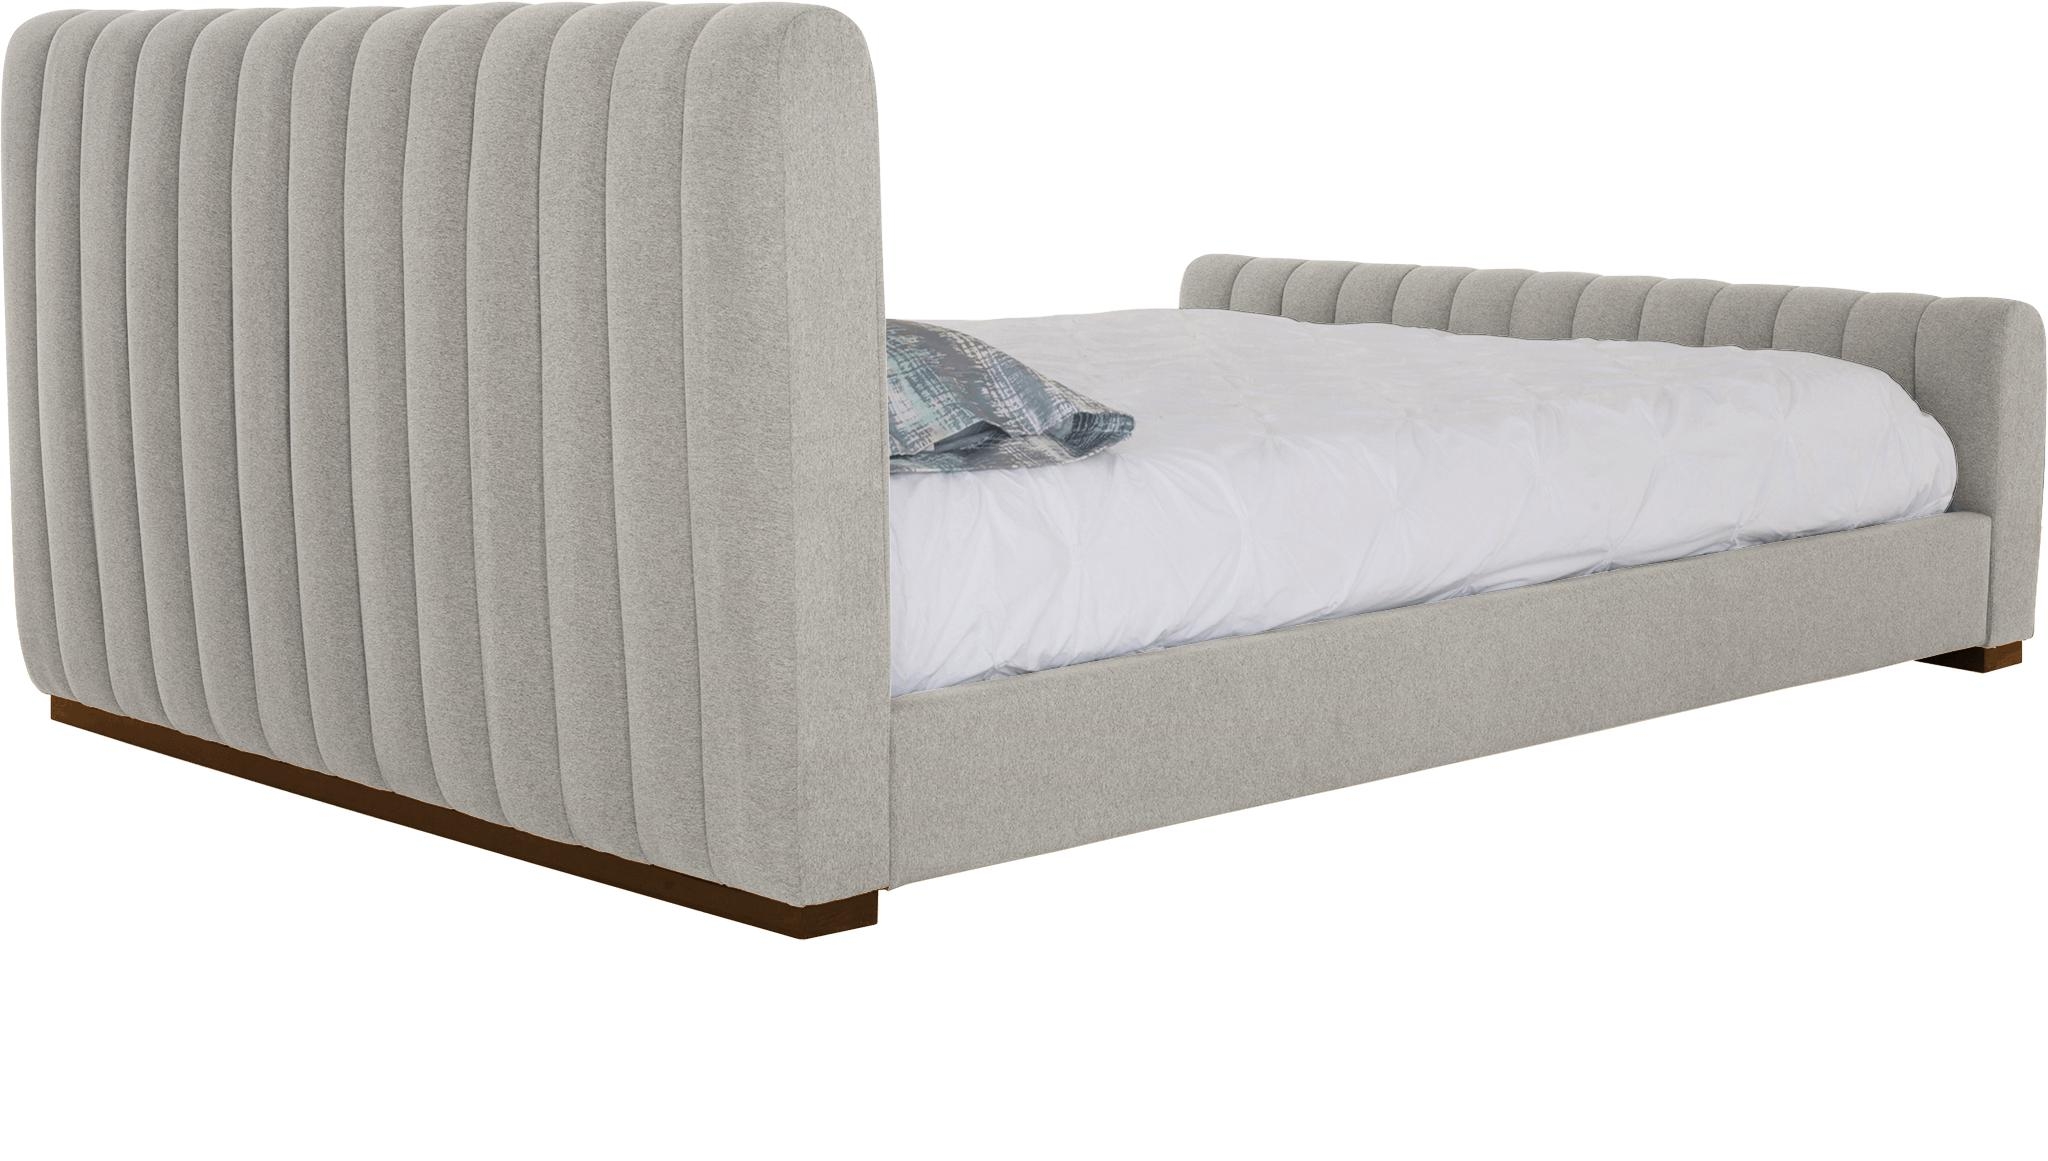 White Camille Mid Century Modern Bed - Bloke Cotton - Mocha - Queen - Image 3